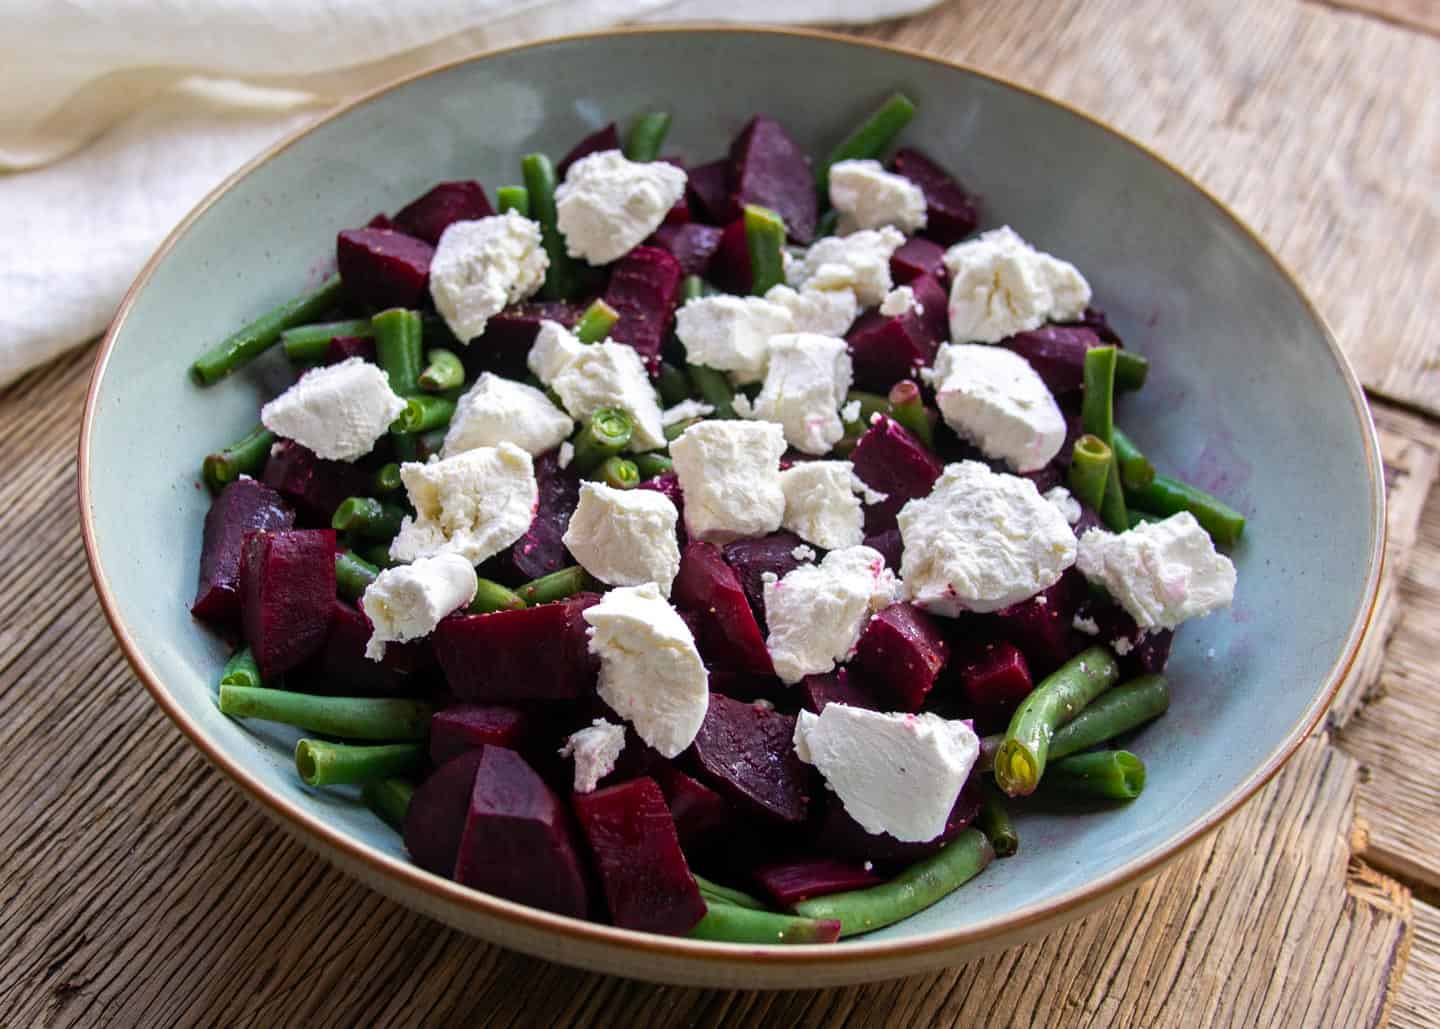 Cold Beet Salad with Goat Cheese on top